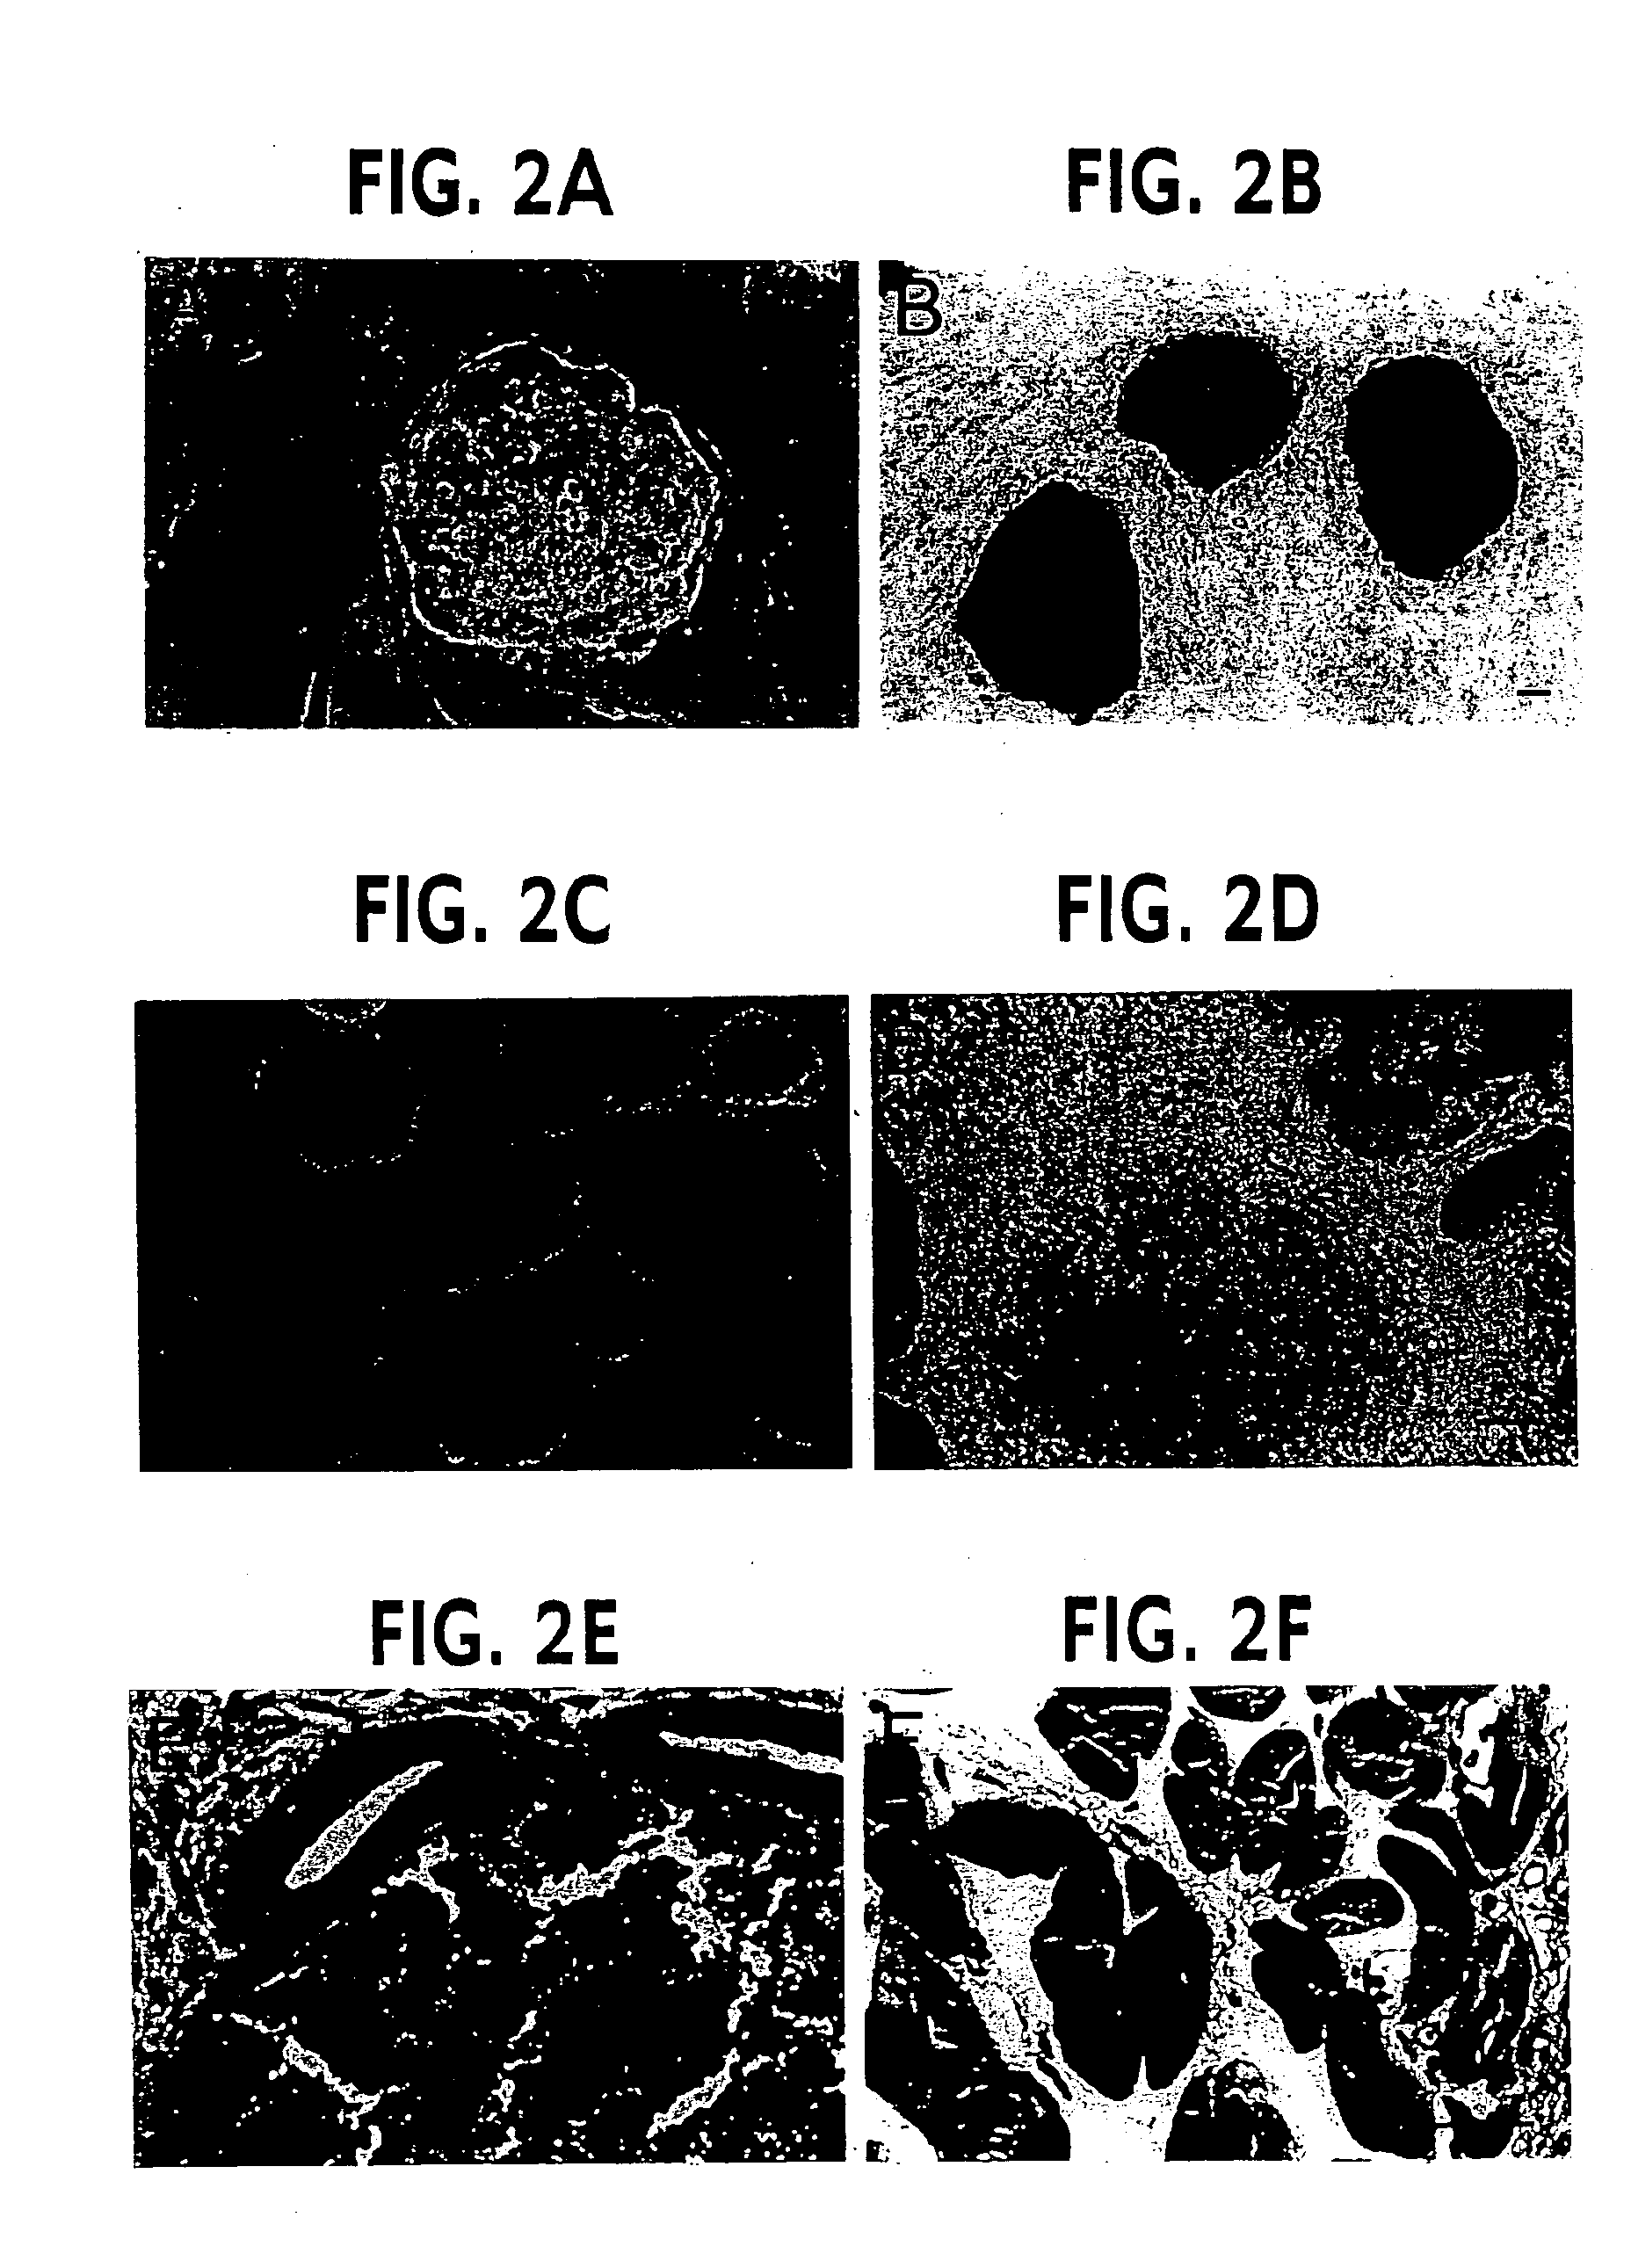 Methods for assaying gene imprinting and methylated CpG islands